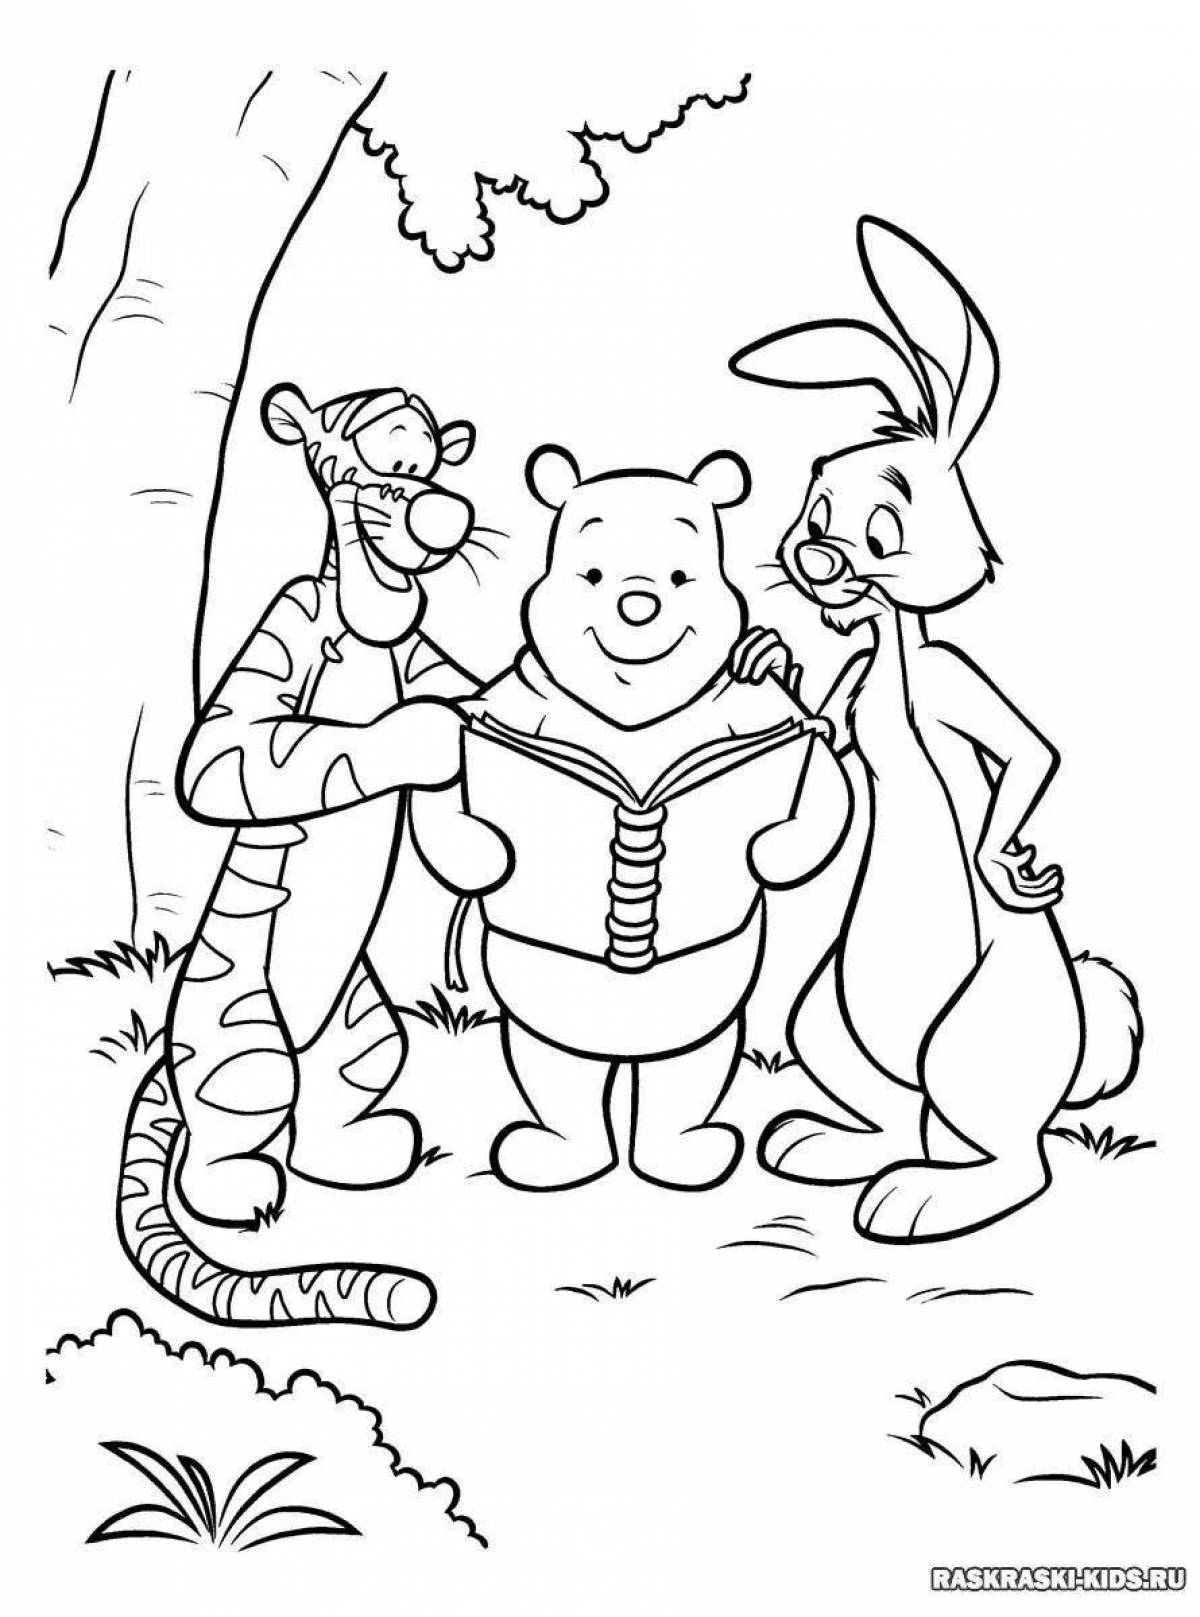 Gorgeous winnie the pooh and friends coloring book